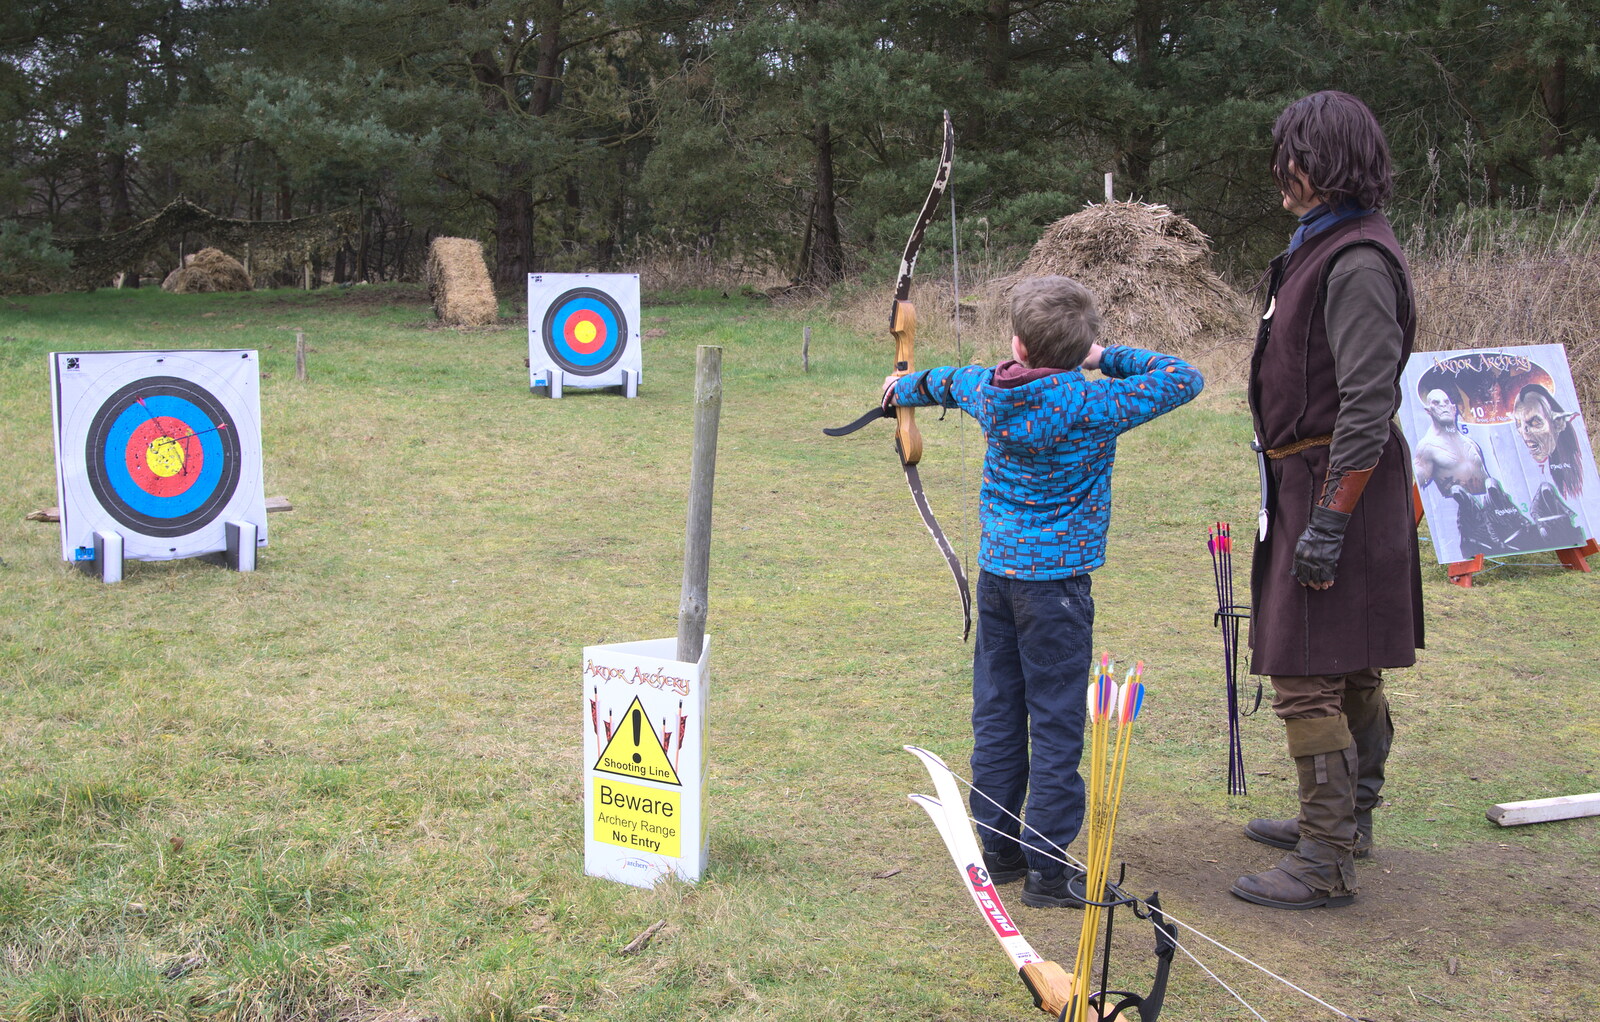 Fred has another go at archery from An Anglo-Saxon Village, West Stow, Suffolk - 19th February 2017